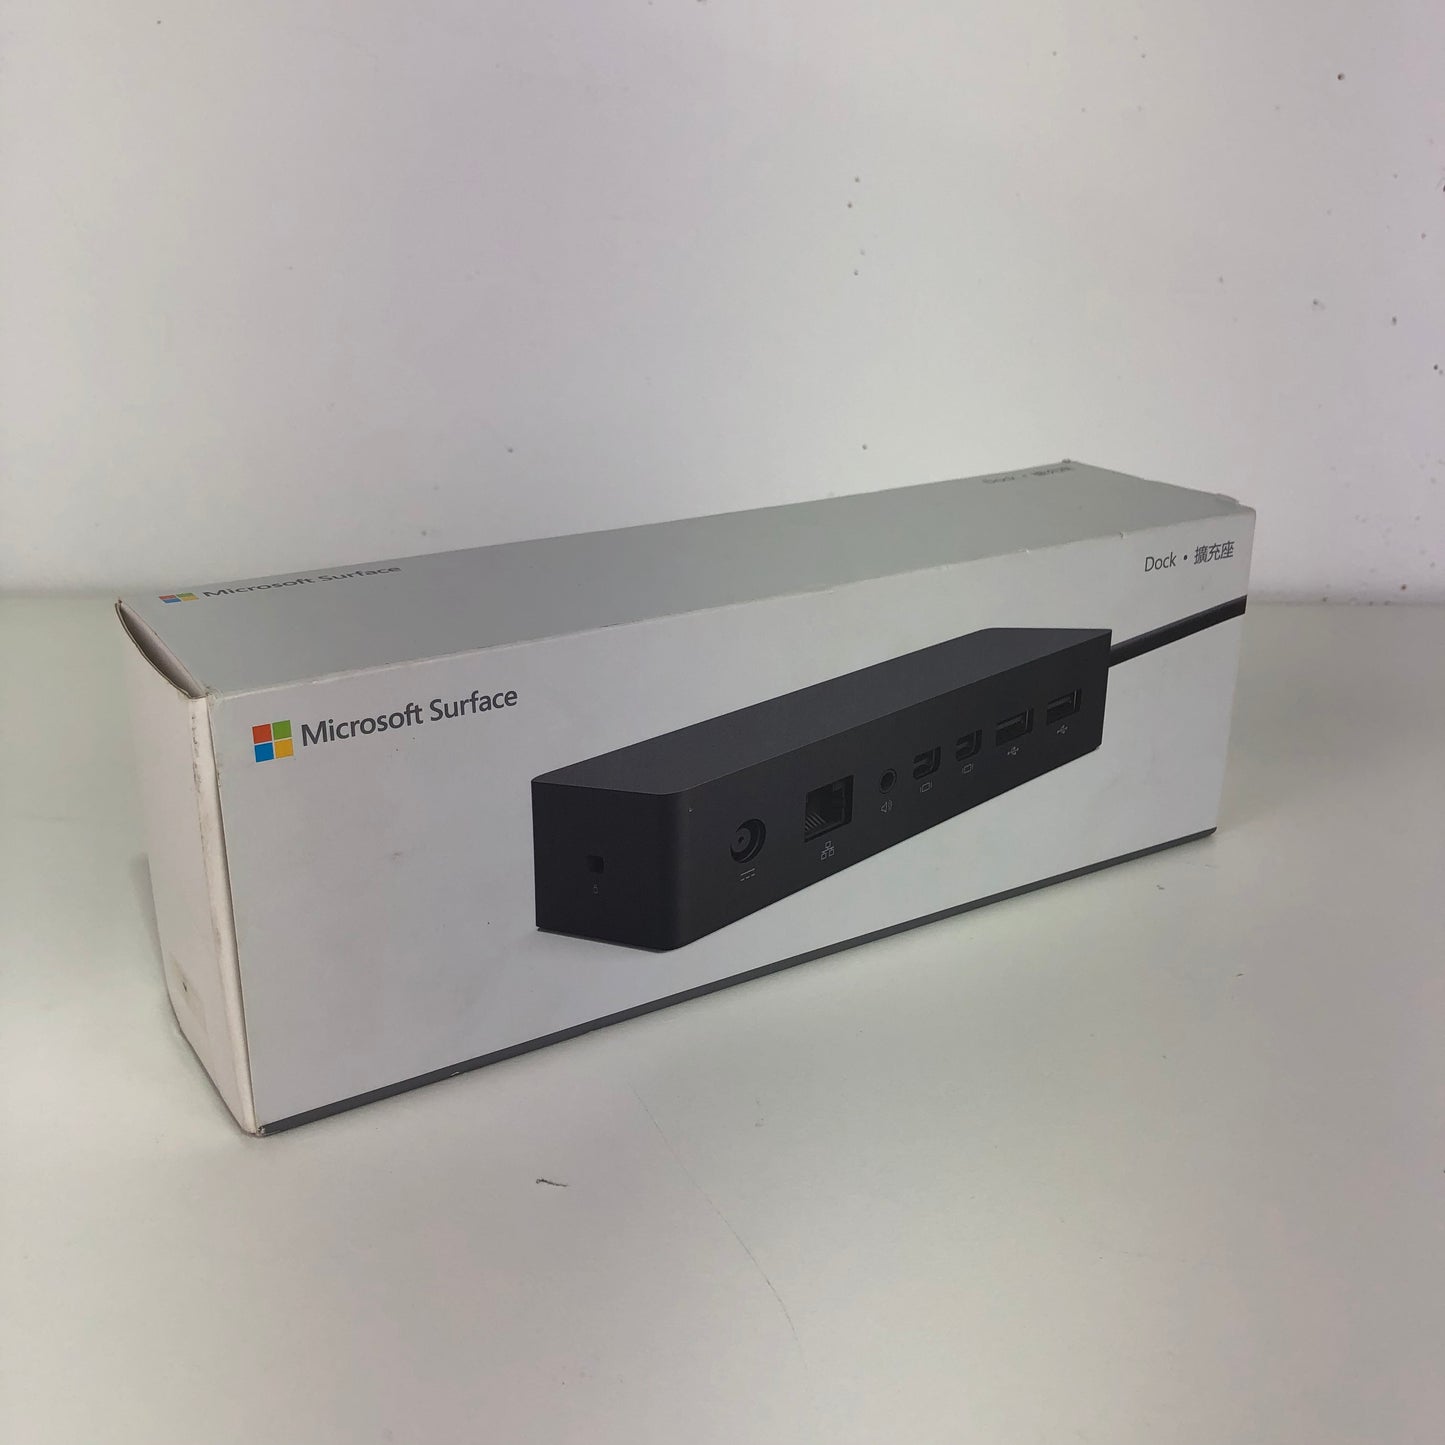 Microsoft Surface Dock (New In Box)